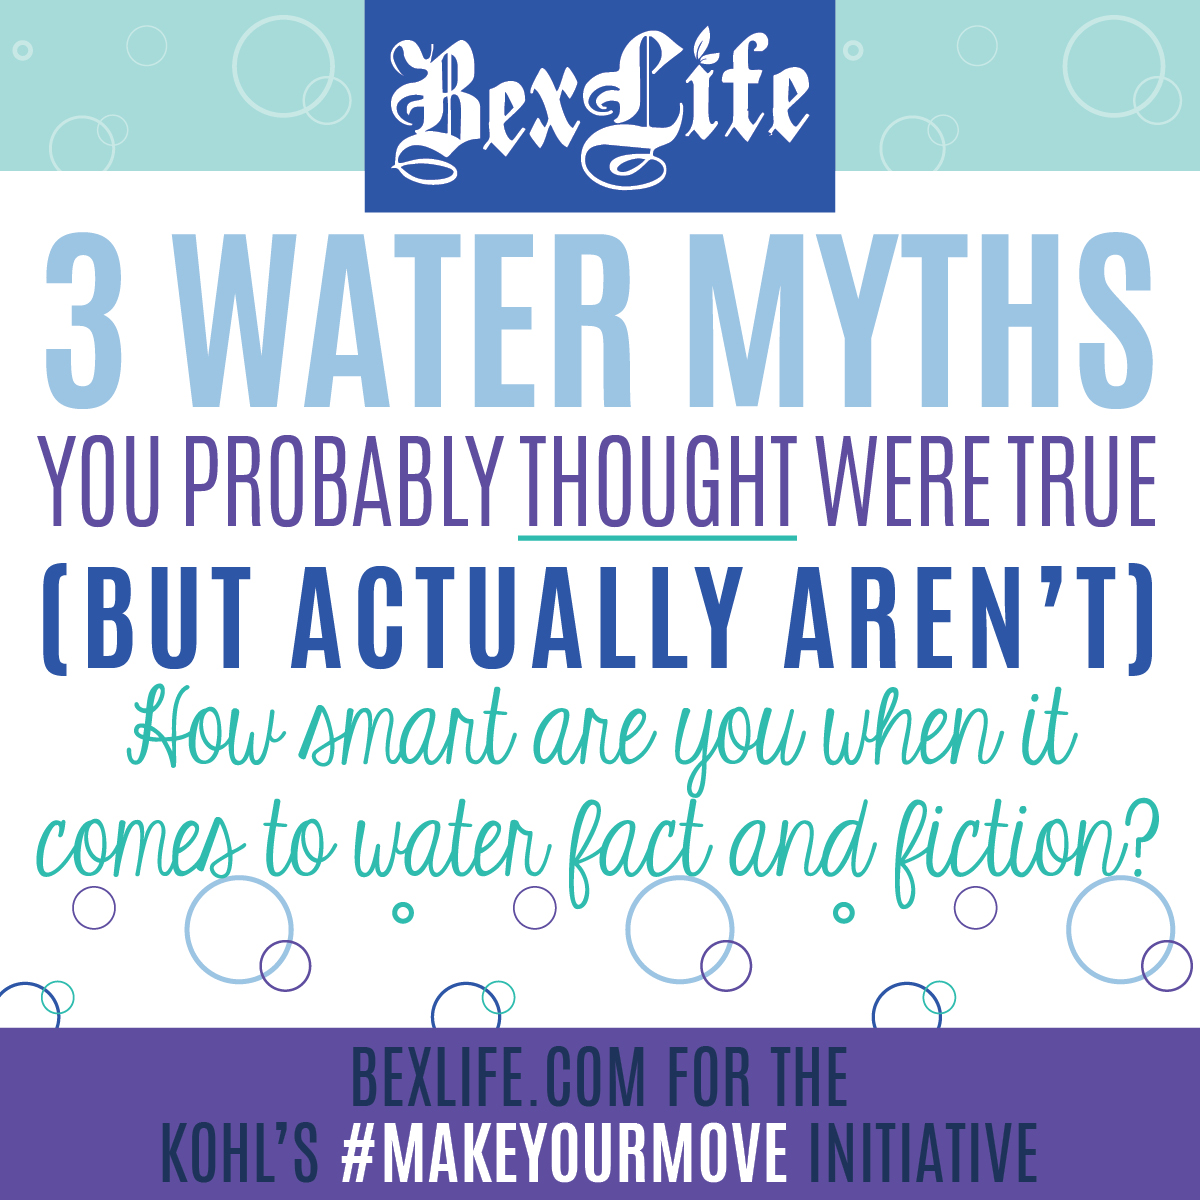 How smart are you when it comes to fact and fiction? Get the whole truth at BexLife.com! #MakeYourMove